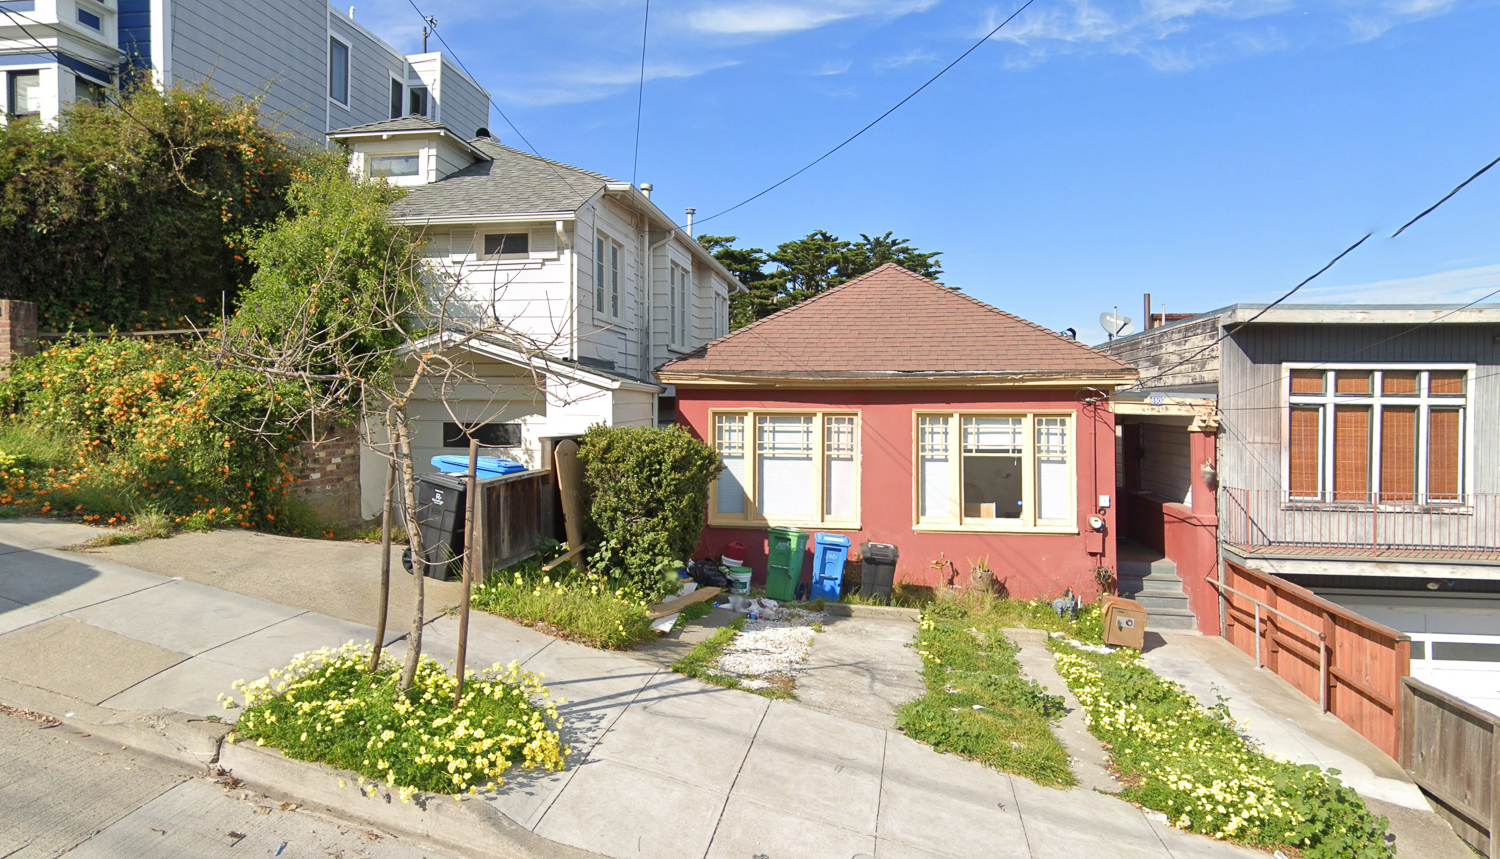 650 (right) and 654 (left) 28th Street, image via Google Street View